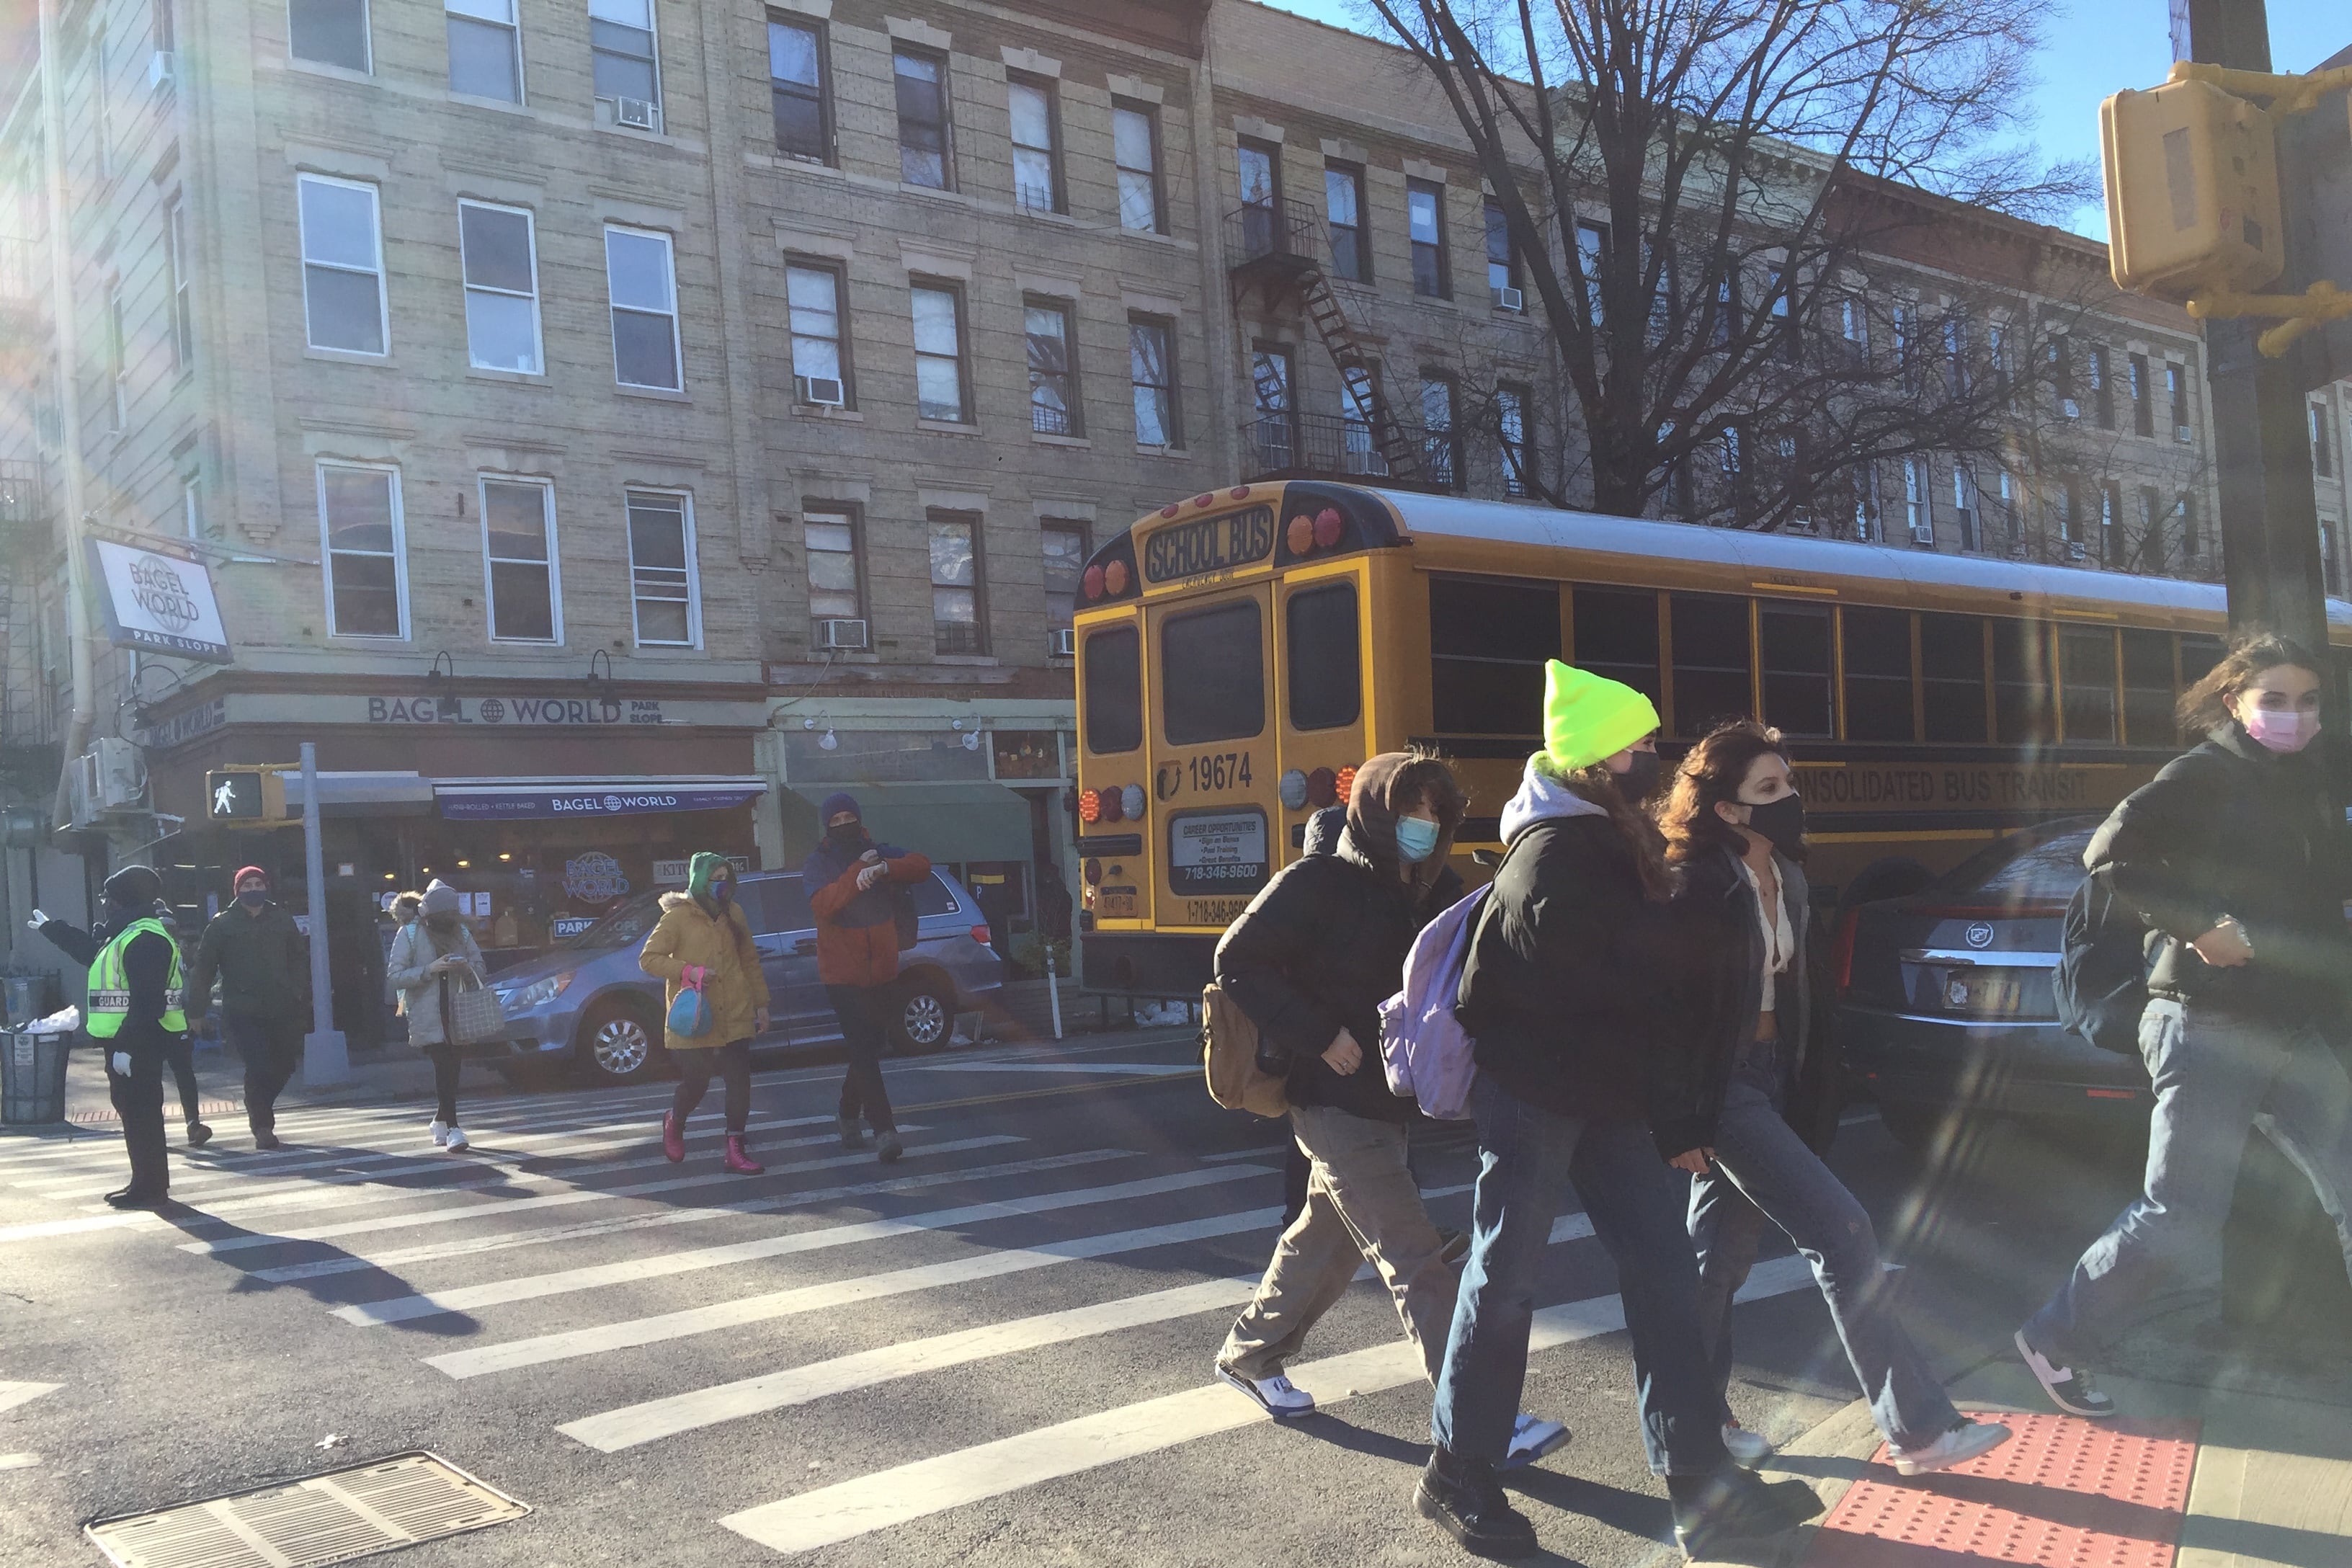 NYC middle schools reopened on Thursday, Feb. 25. Students at M.S. 51 in Park Slope, Brooklyn streamed into the building, socially distanced and masked.